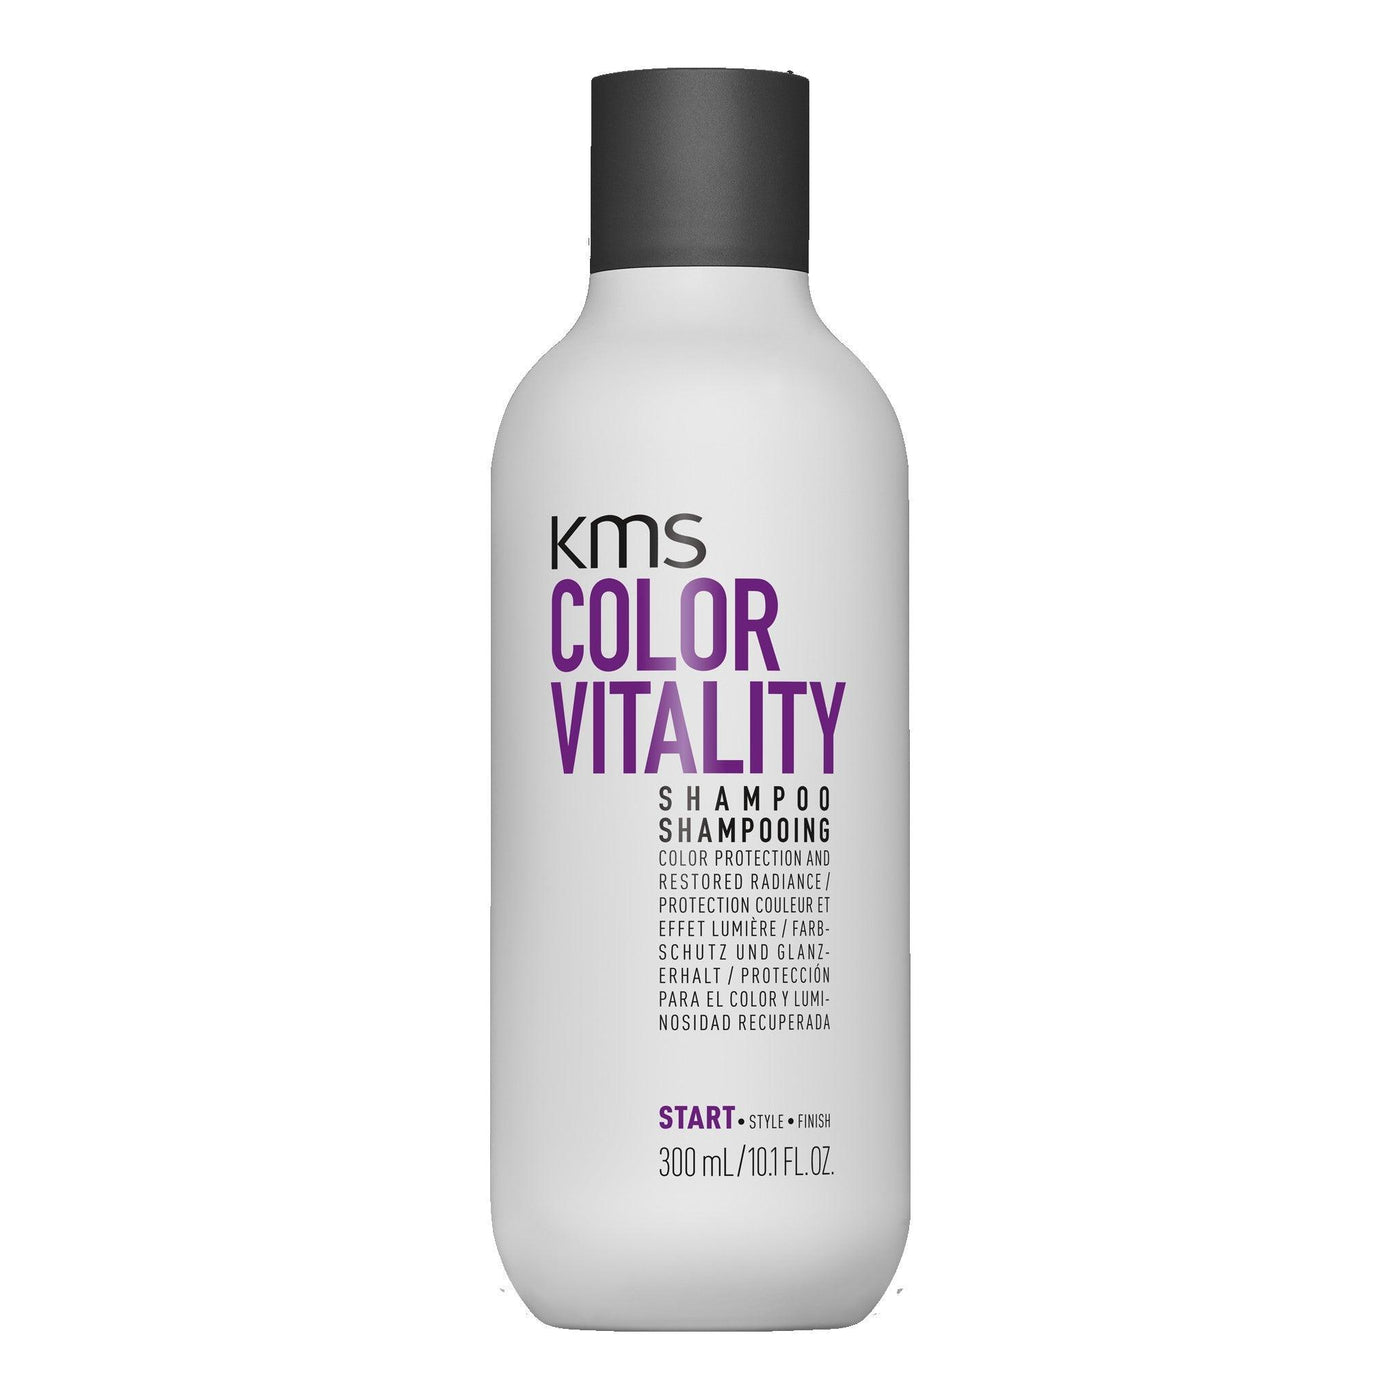 Kms Colorvitality Shampoo 300ml KMS Boutique Deauville